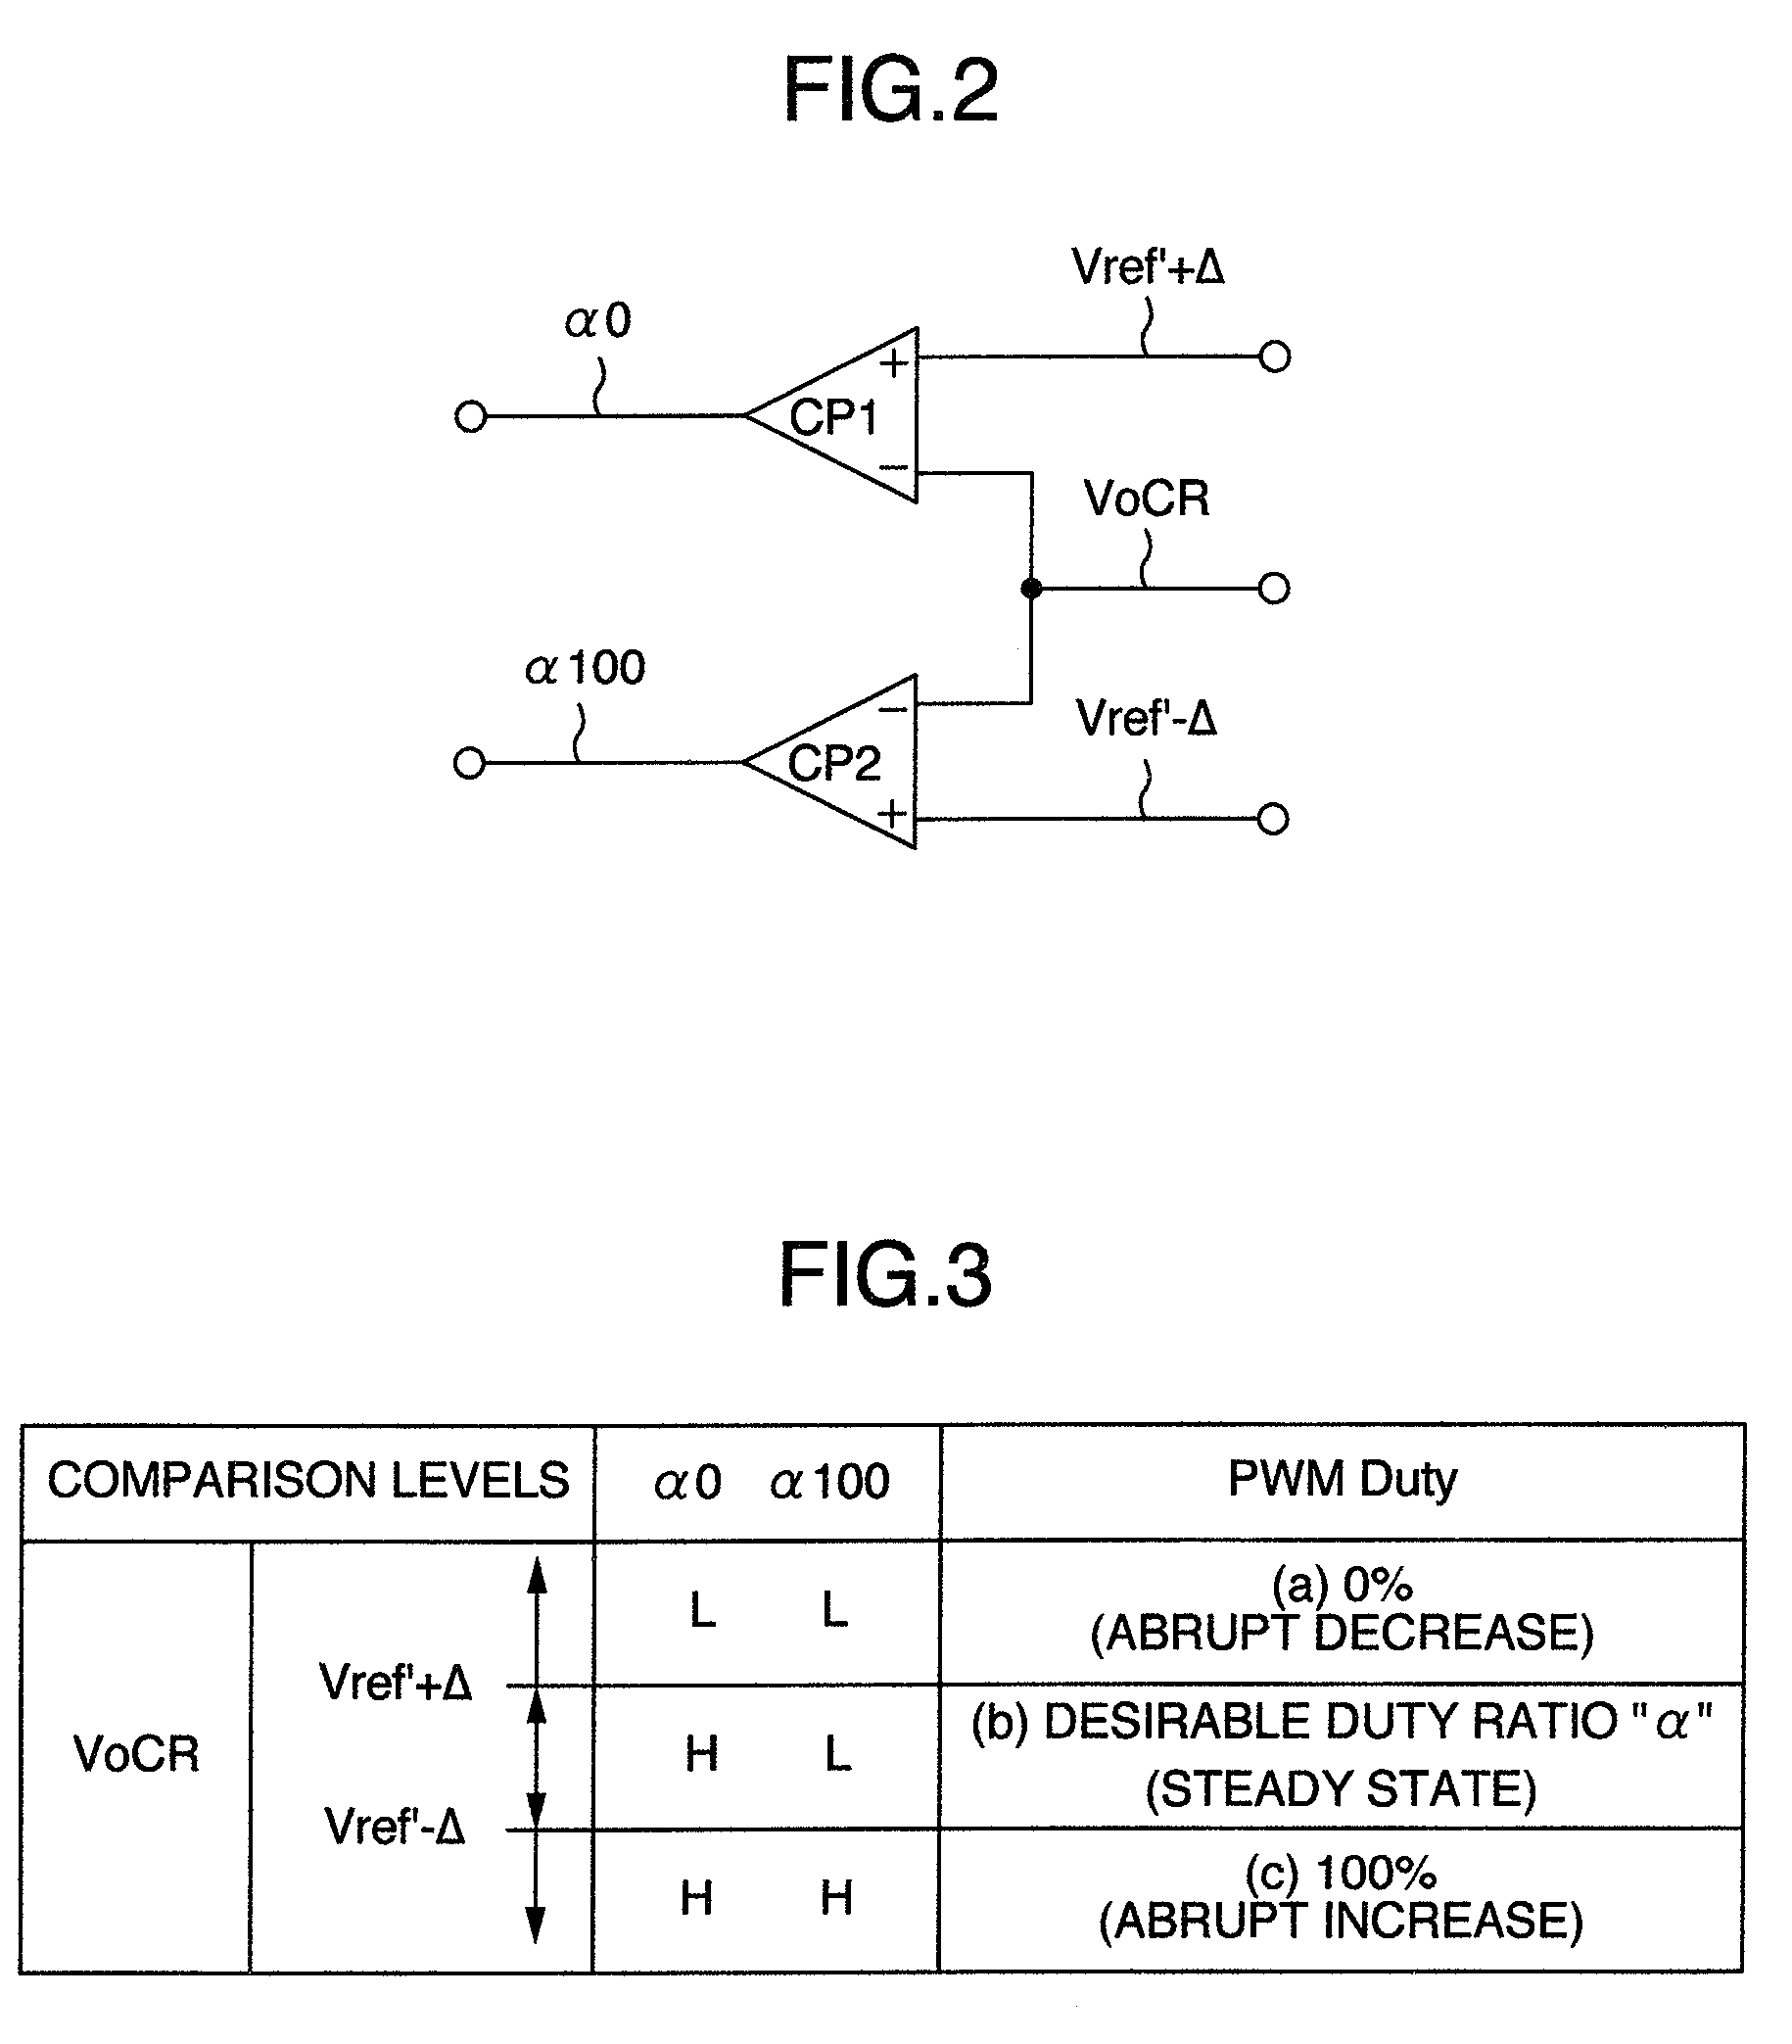 Power supplying apparatus including a pulse-width modulation oscillator and smoothing filters